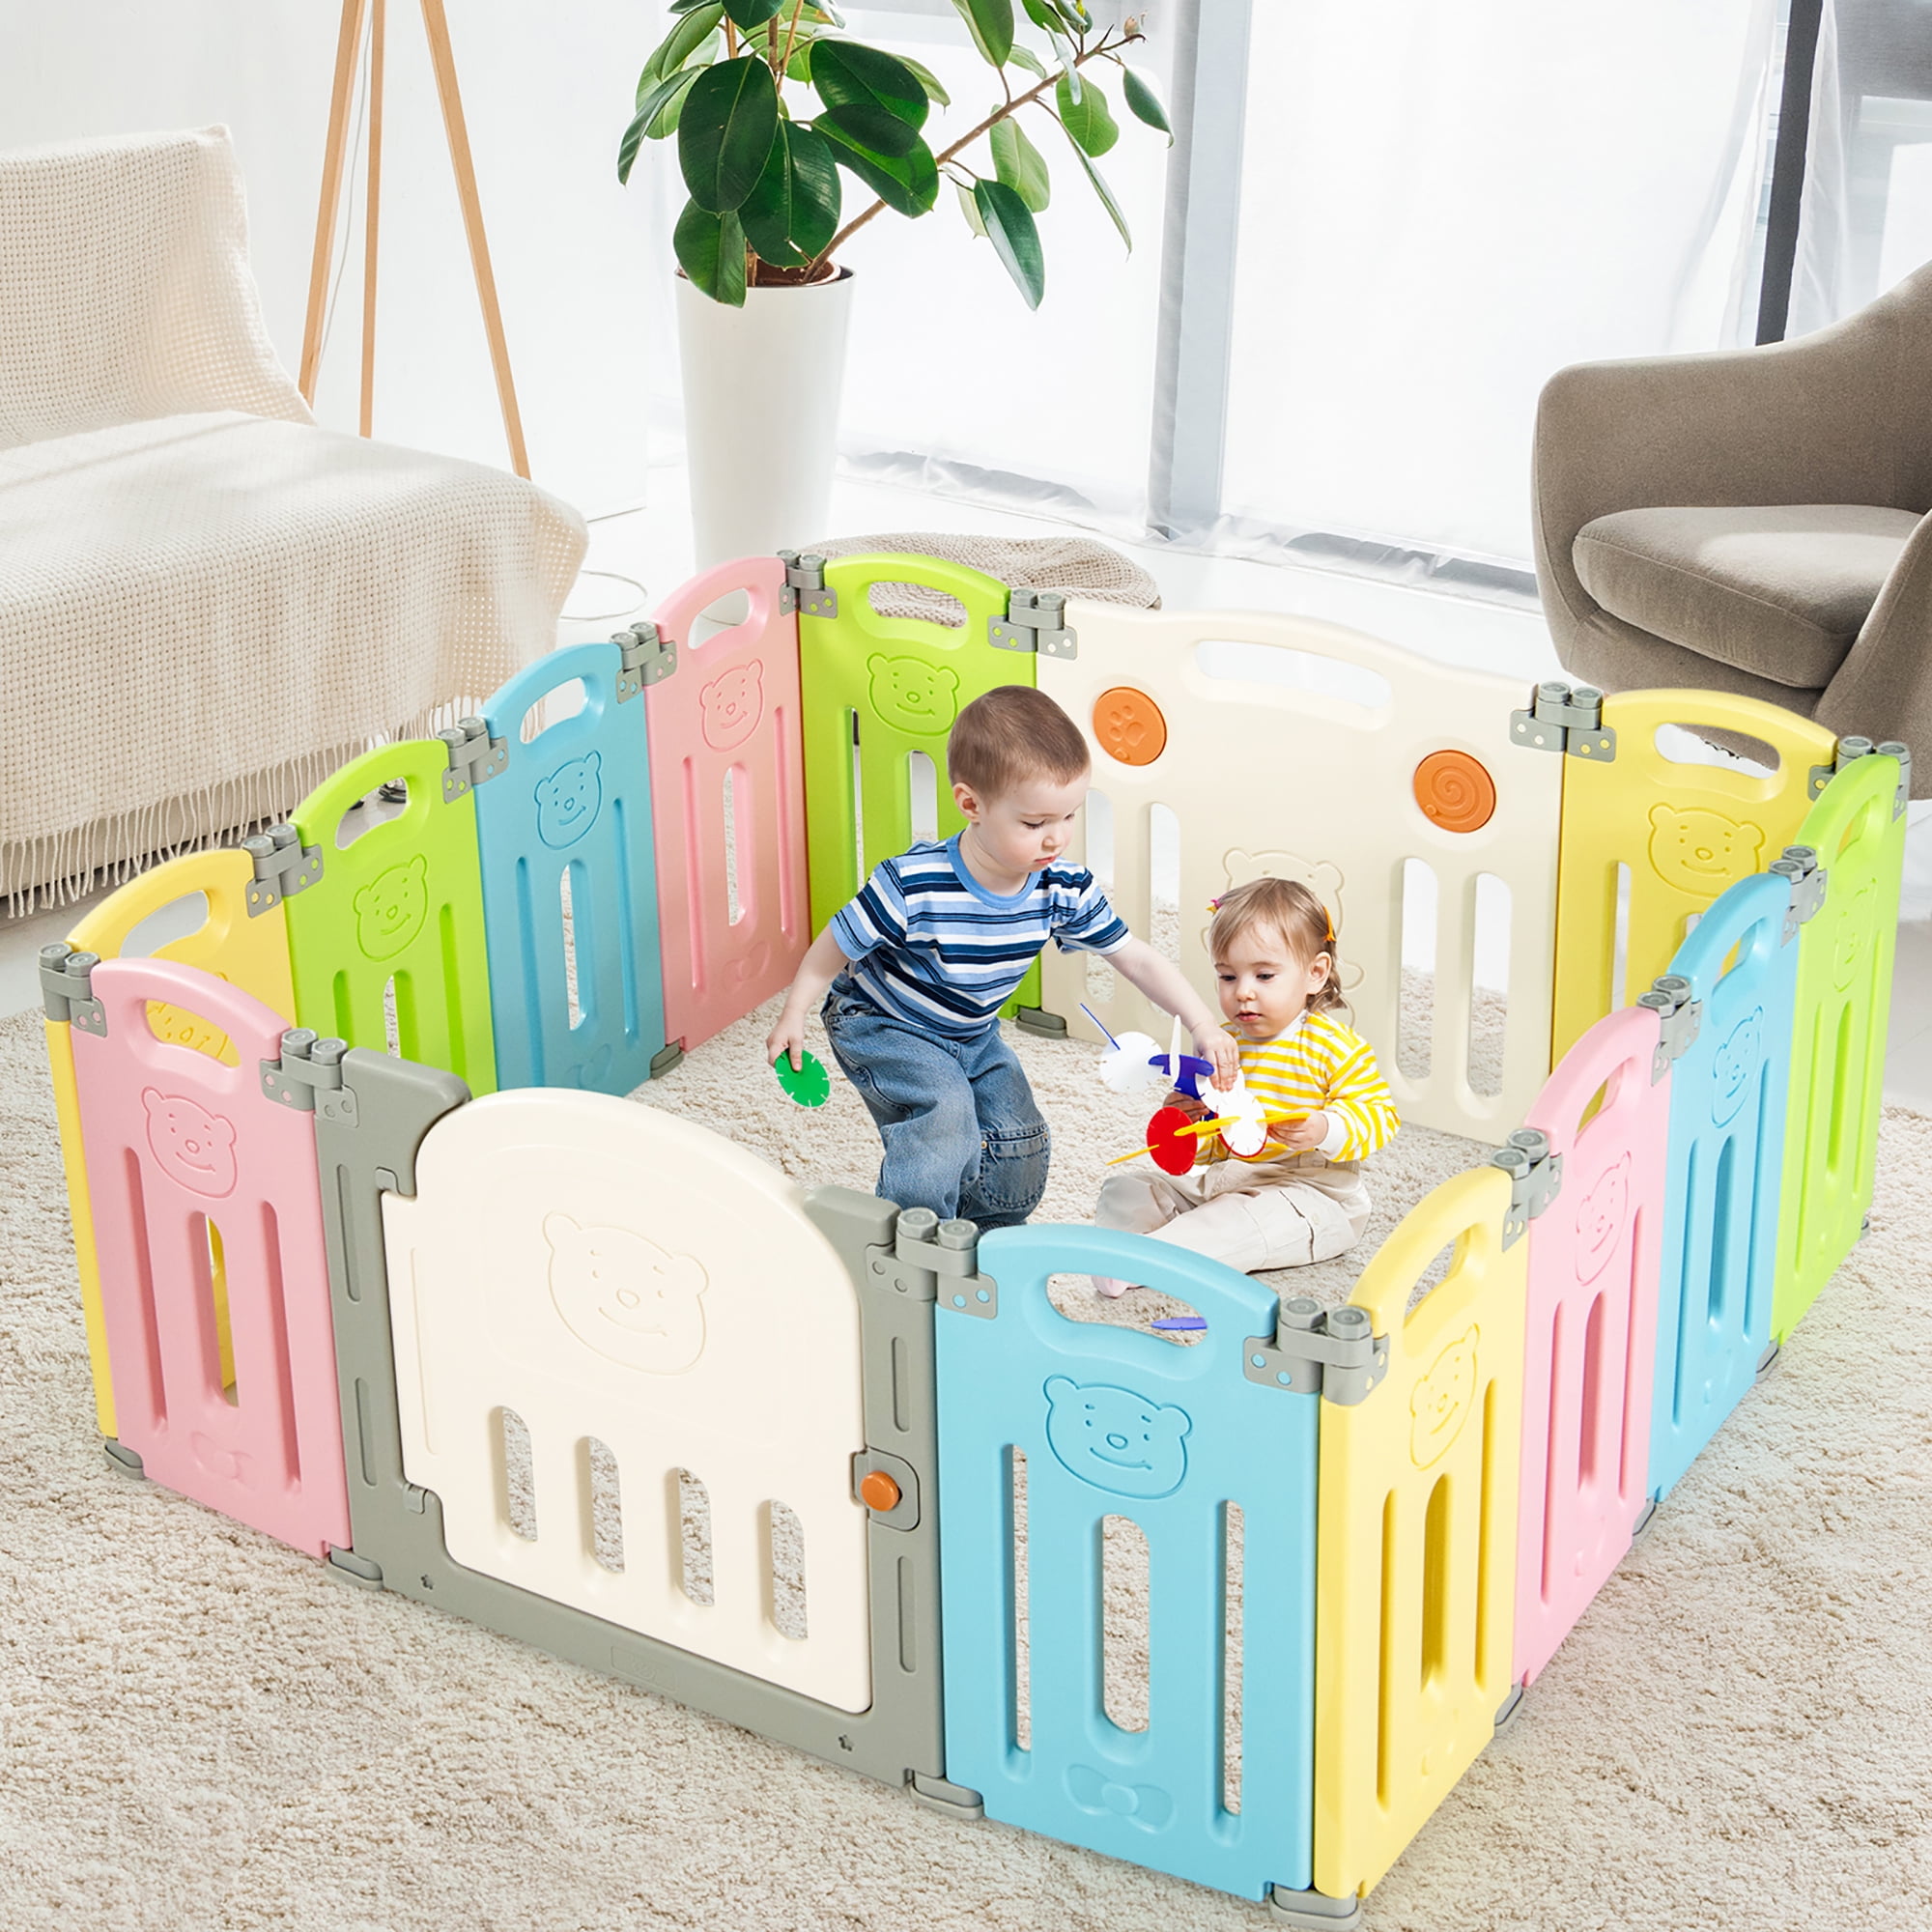 Baby Playpen Kids Activity Centre Safety Play Yard Home Indoor Outdoor New  Pen (Multicolour, Classic Set 14 Panel)